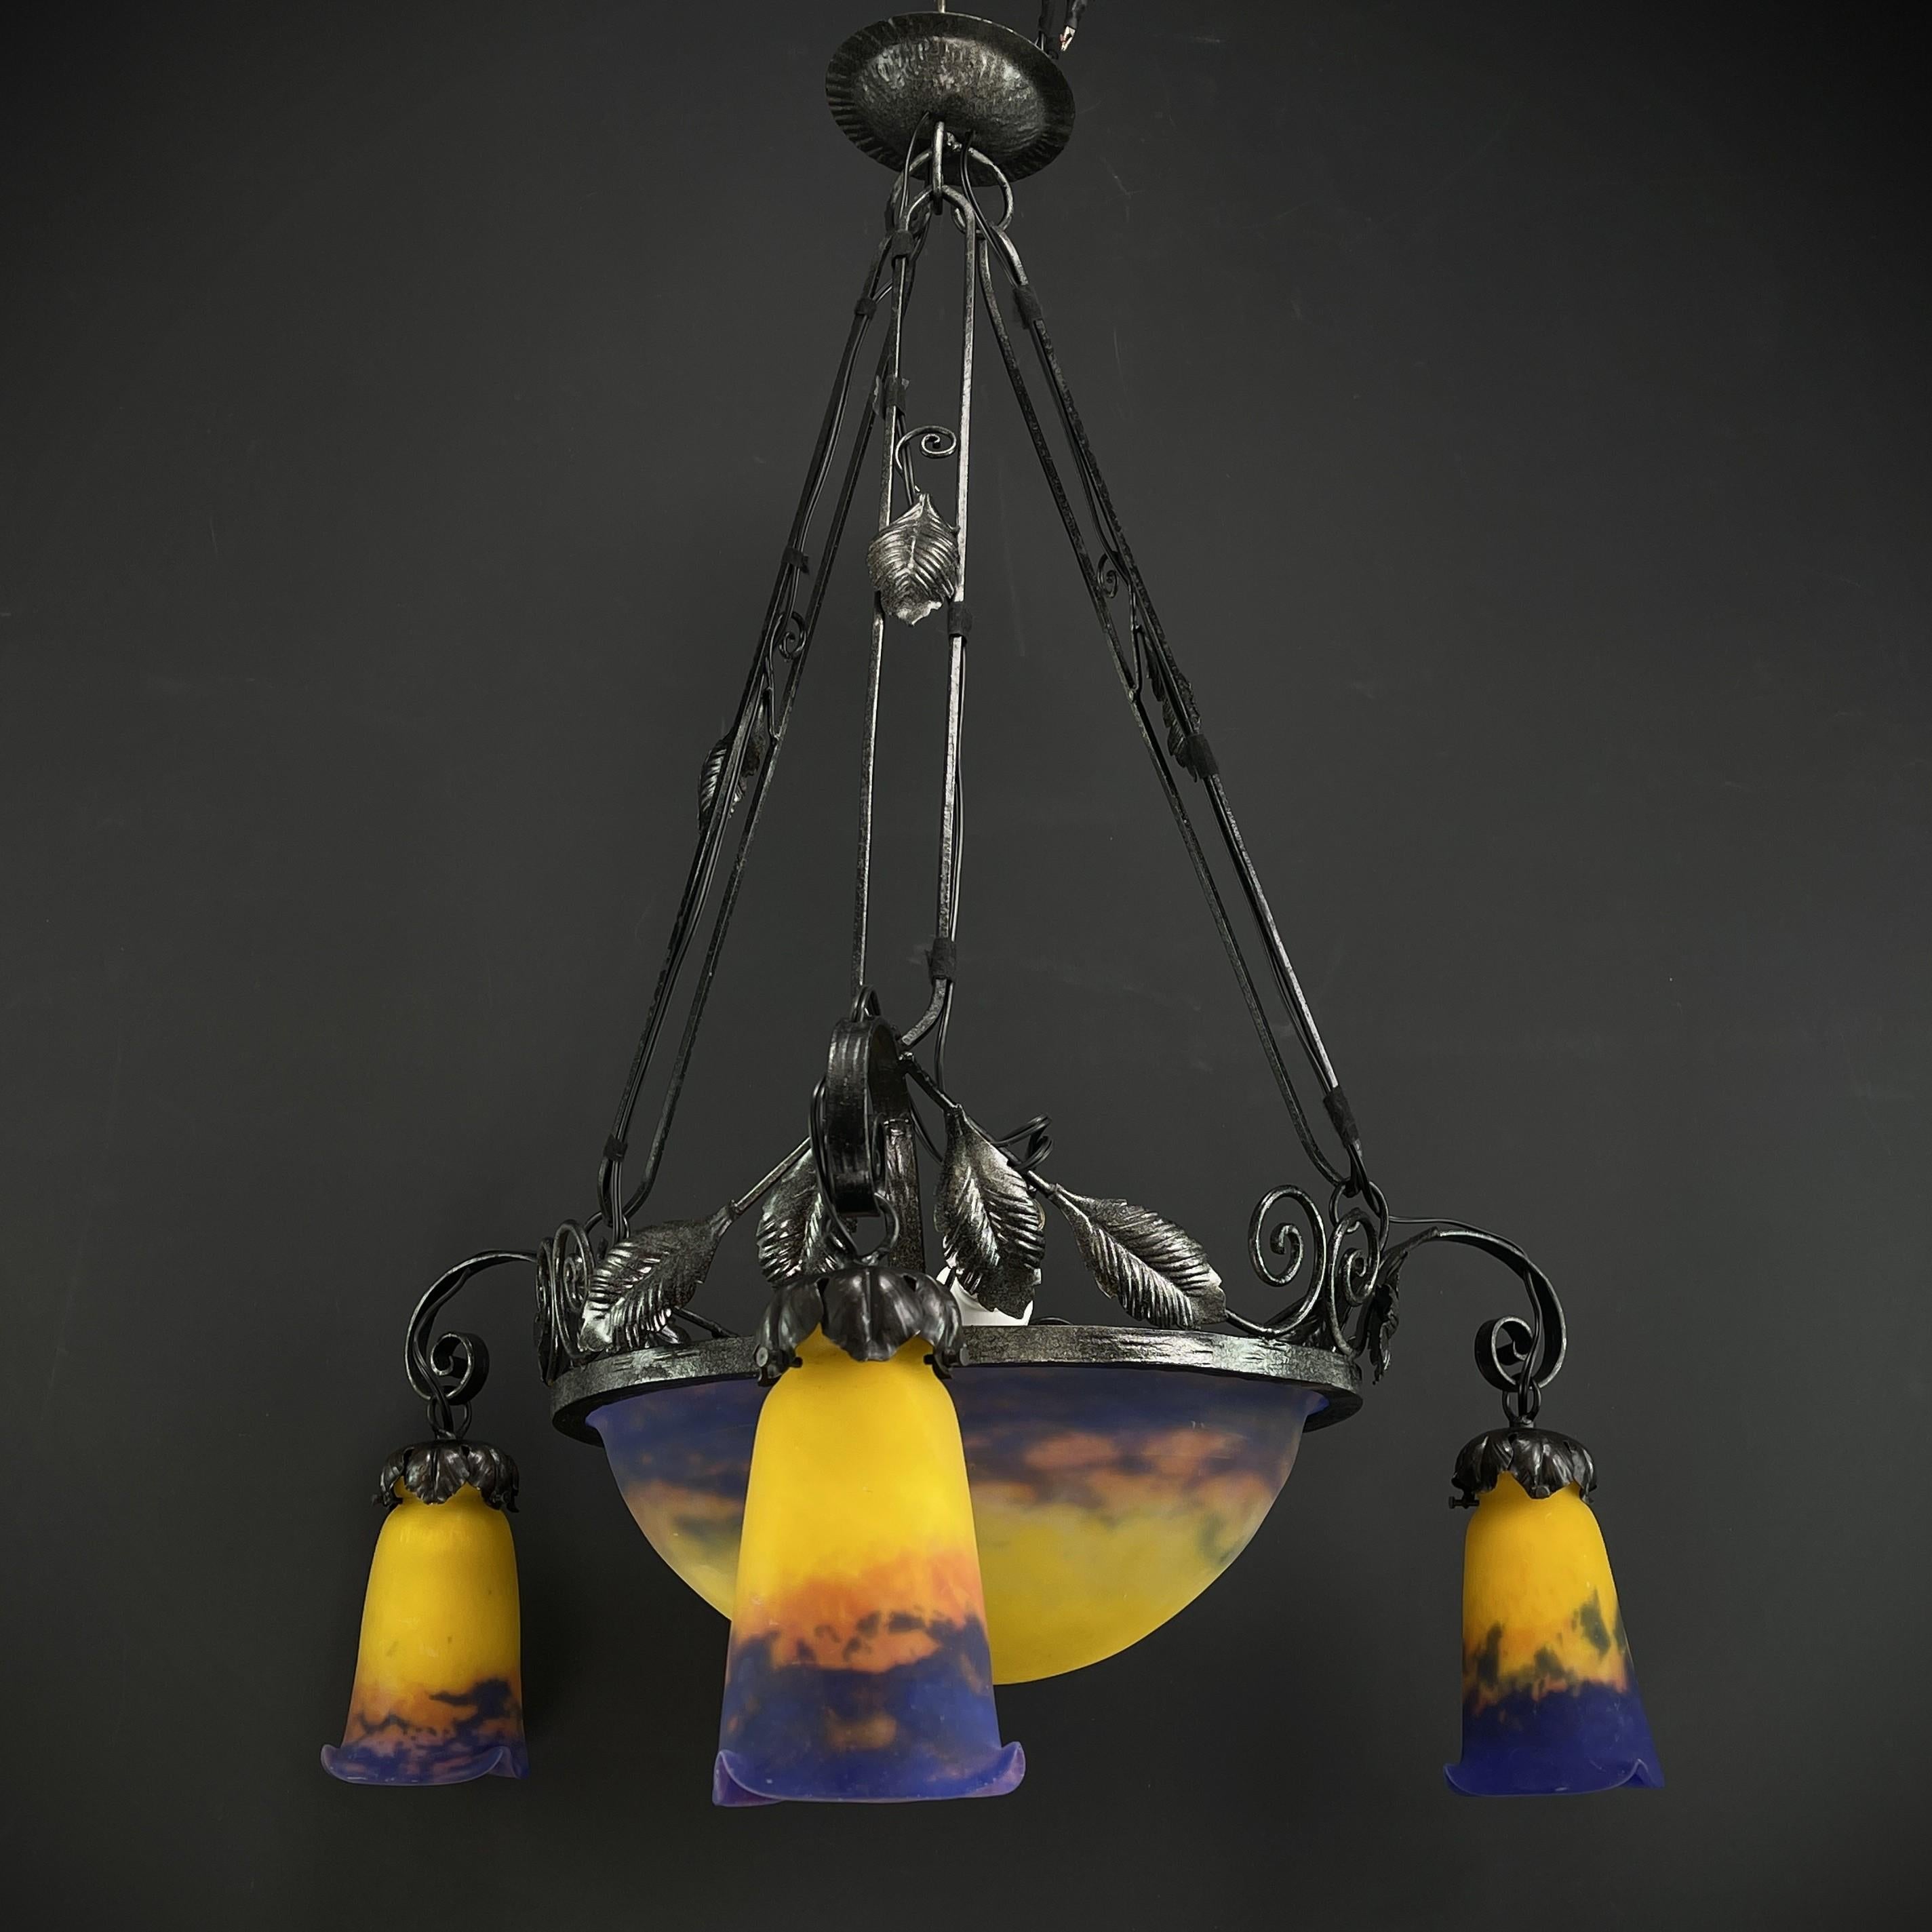 ART DECO ceiling lamp, signed Muller Frerés, 1930s

The ART DECO ceiling lamp is a remarkable example of the craftsmanship and style of the early 20th century. 

The signature 